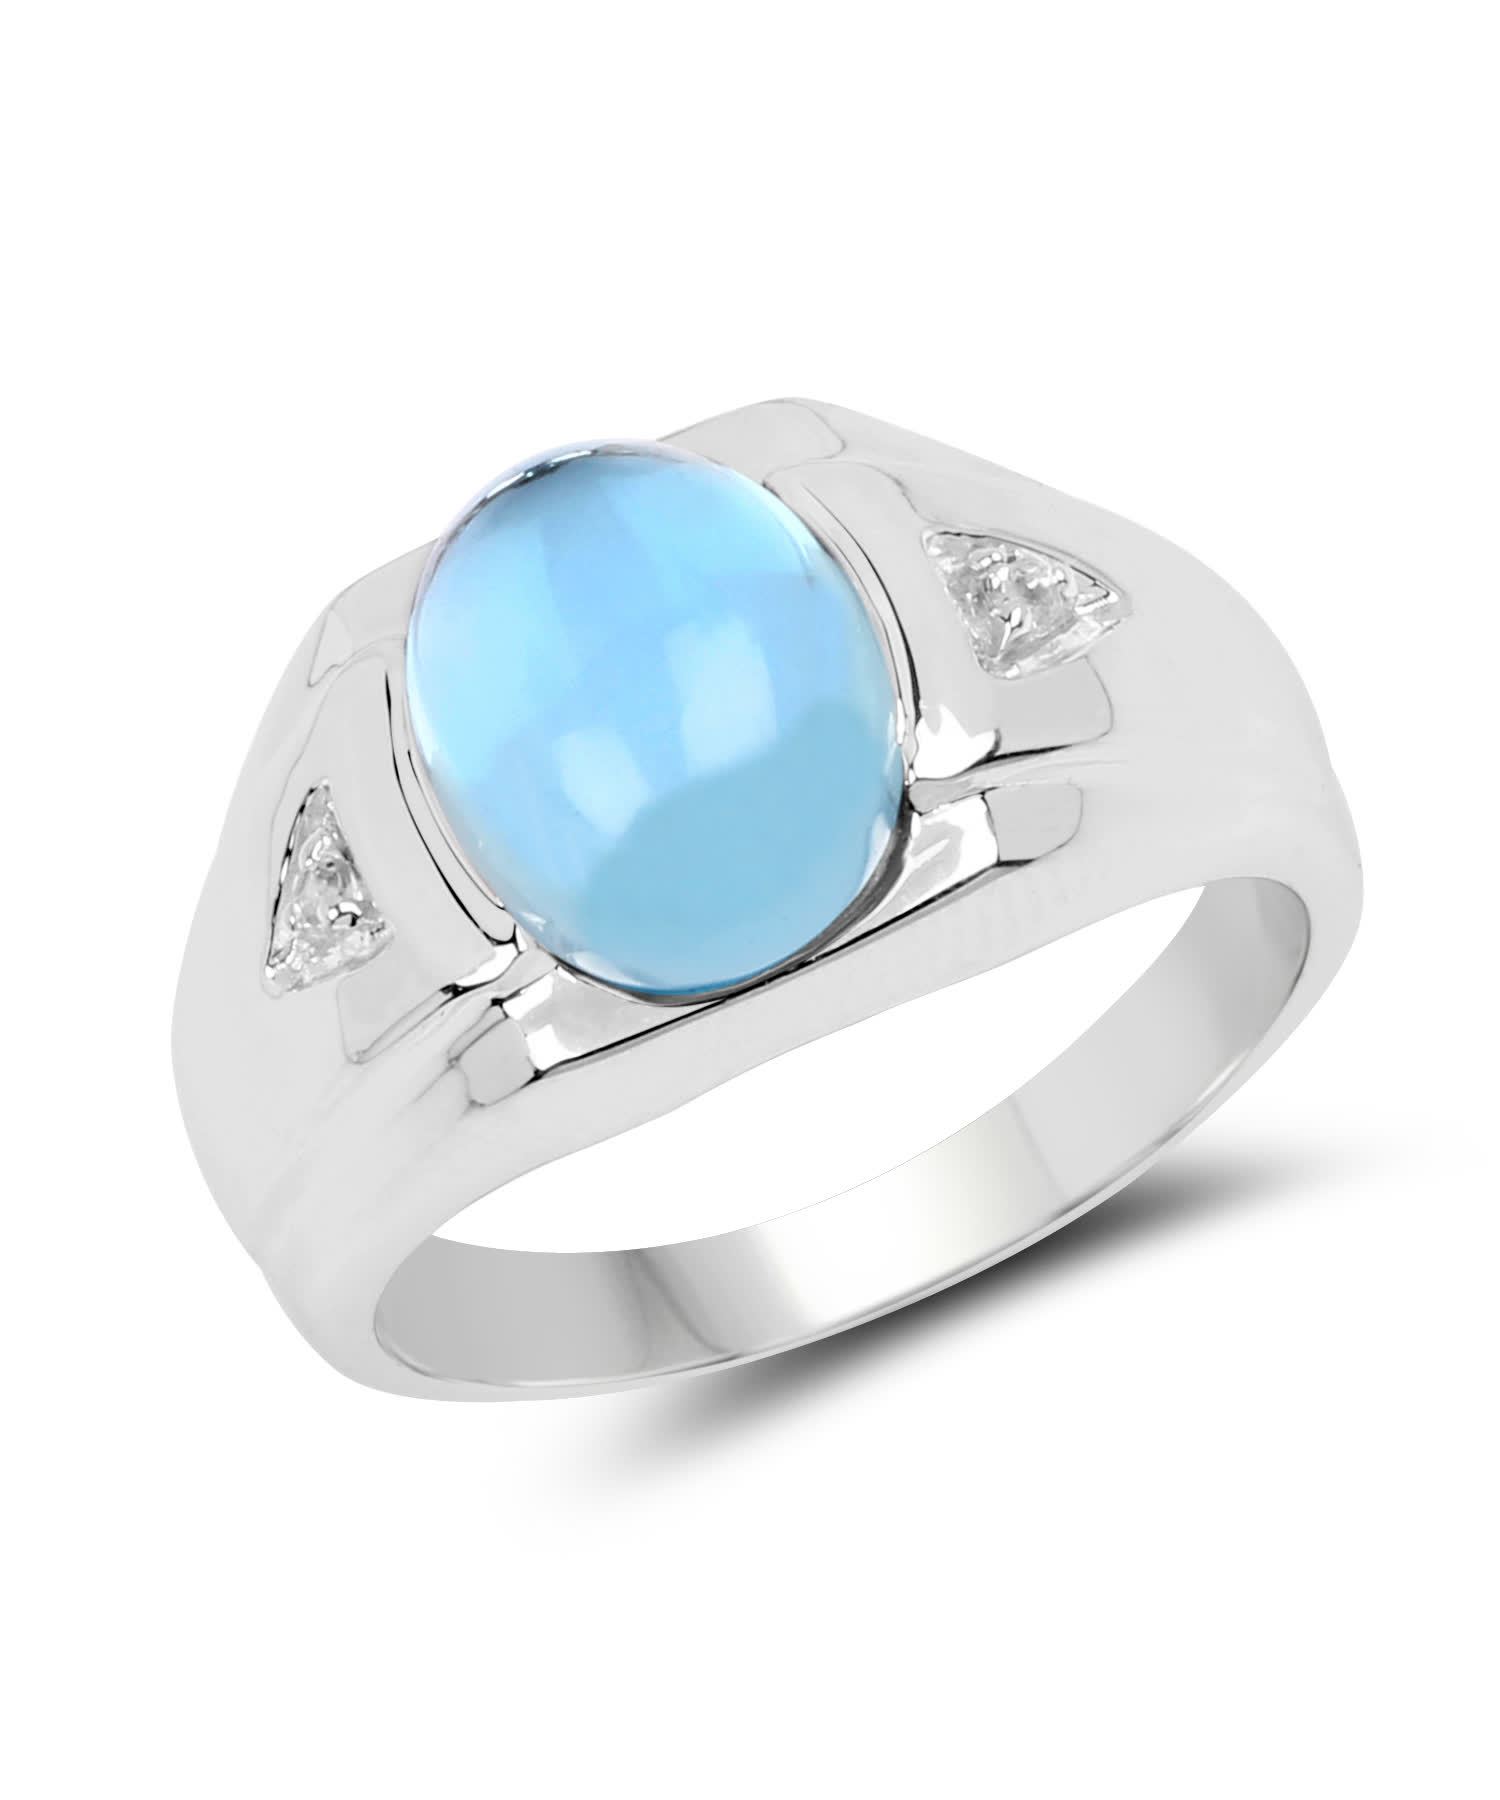 3.67ctw Natural Swiss Blue Topaz Rhodium Plated 925 Sterling Silver Pinky Ring View 1